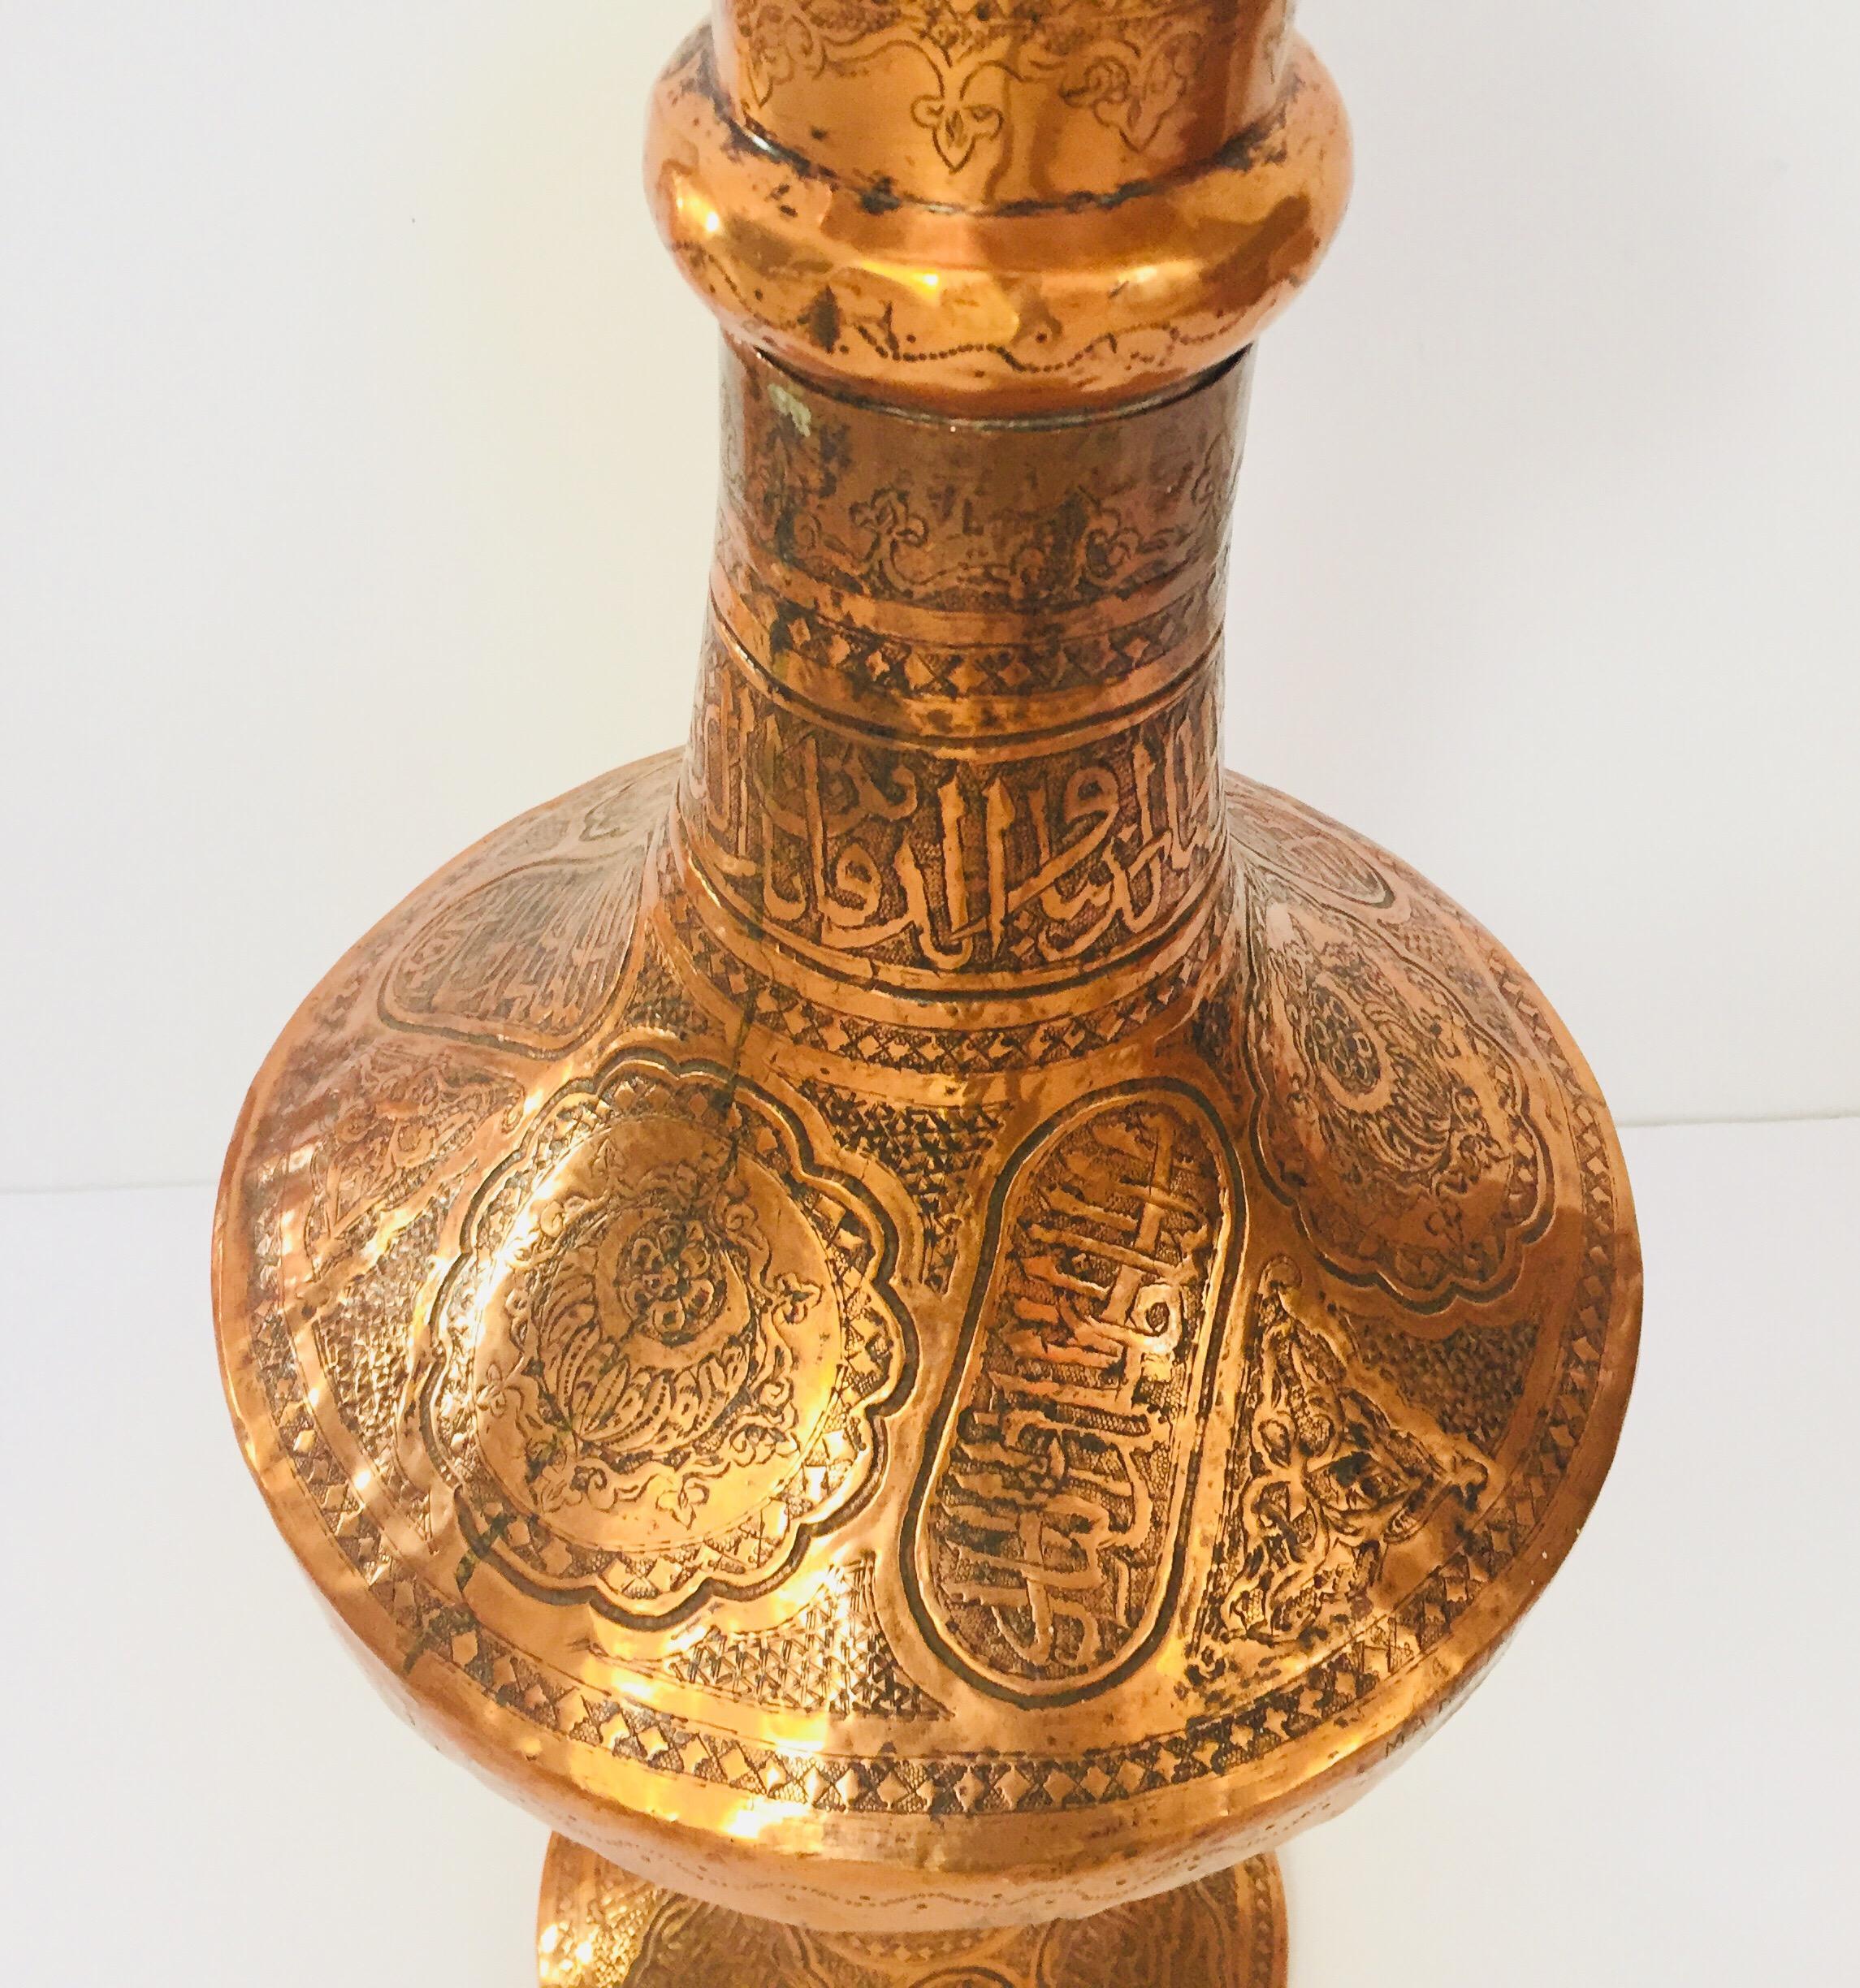 Middle Eastern Syrian Copper Islamic Art Vase Engraved with Arabic Calligraphy 2